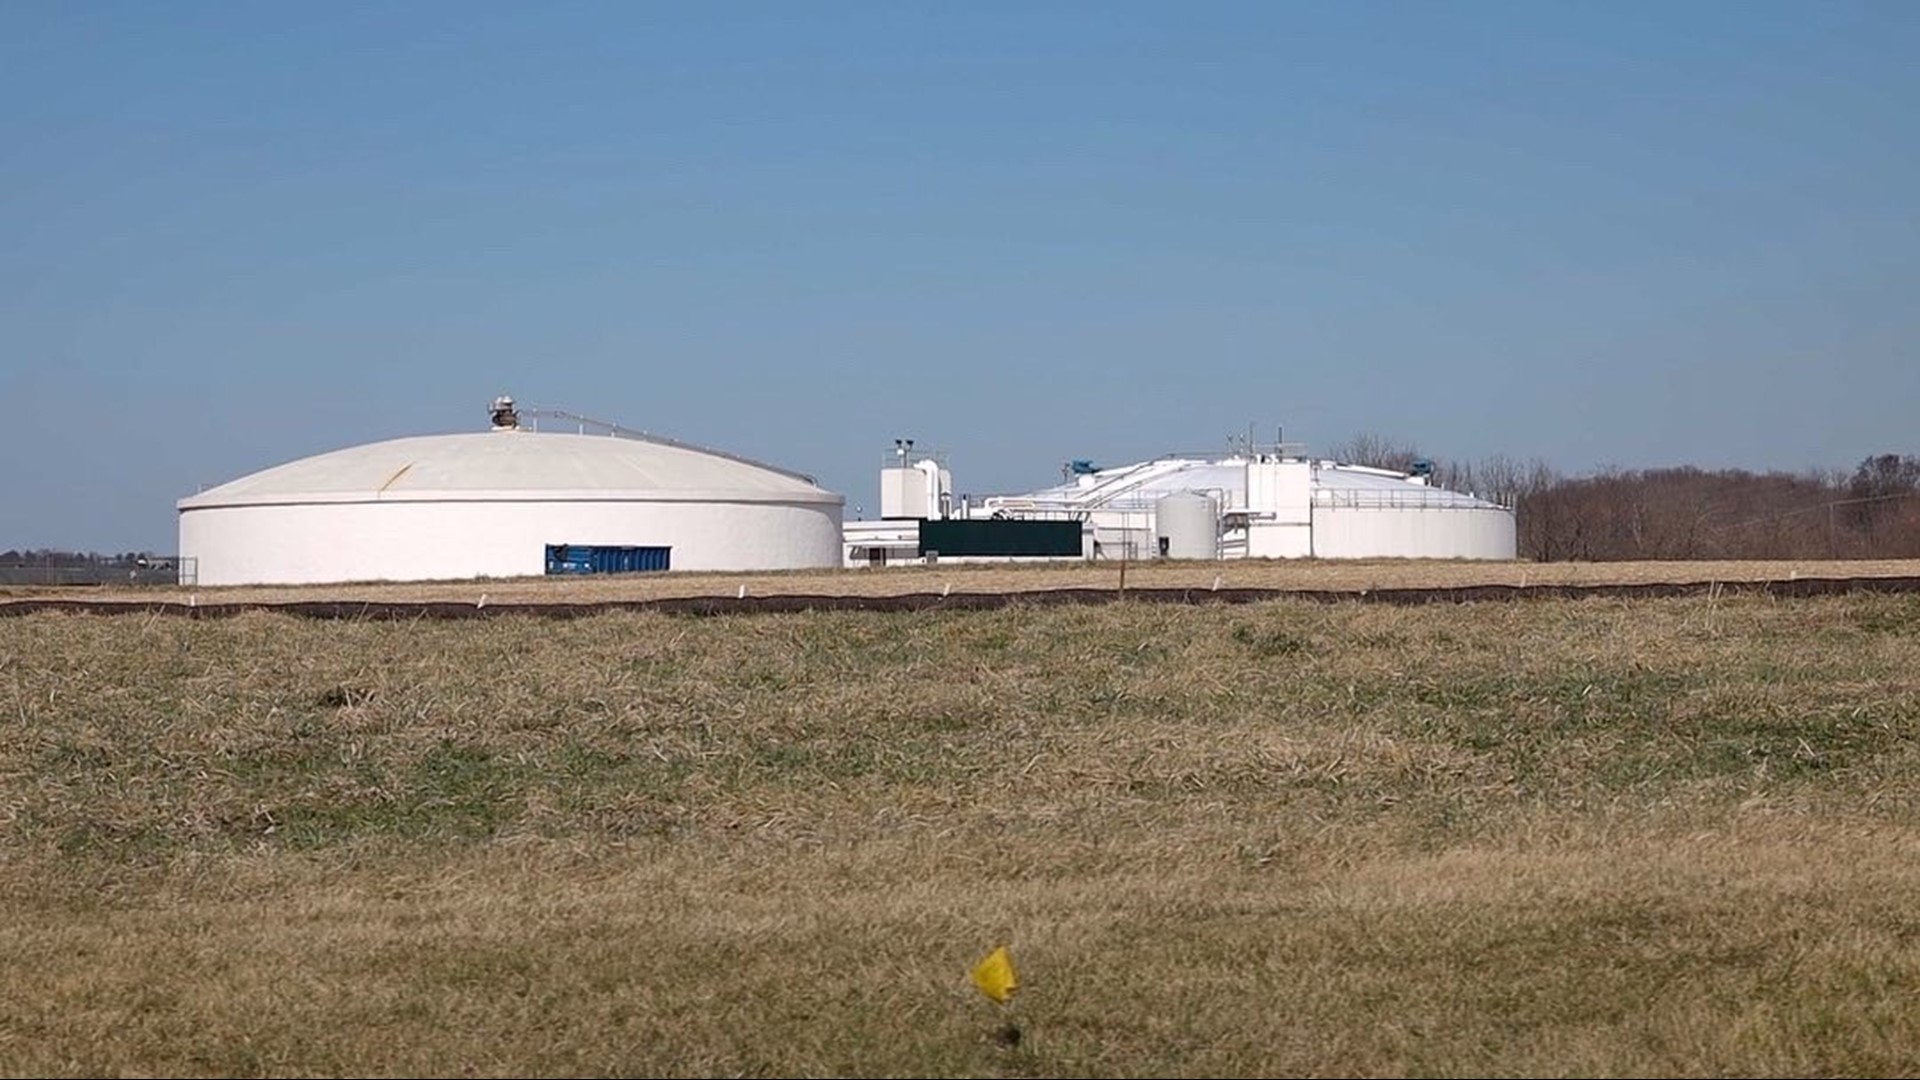 Hanover Foods Corporation is accused of discharging unsafe levels of pollutants from its wastewater treatment facility in Hanover, York County.